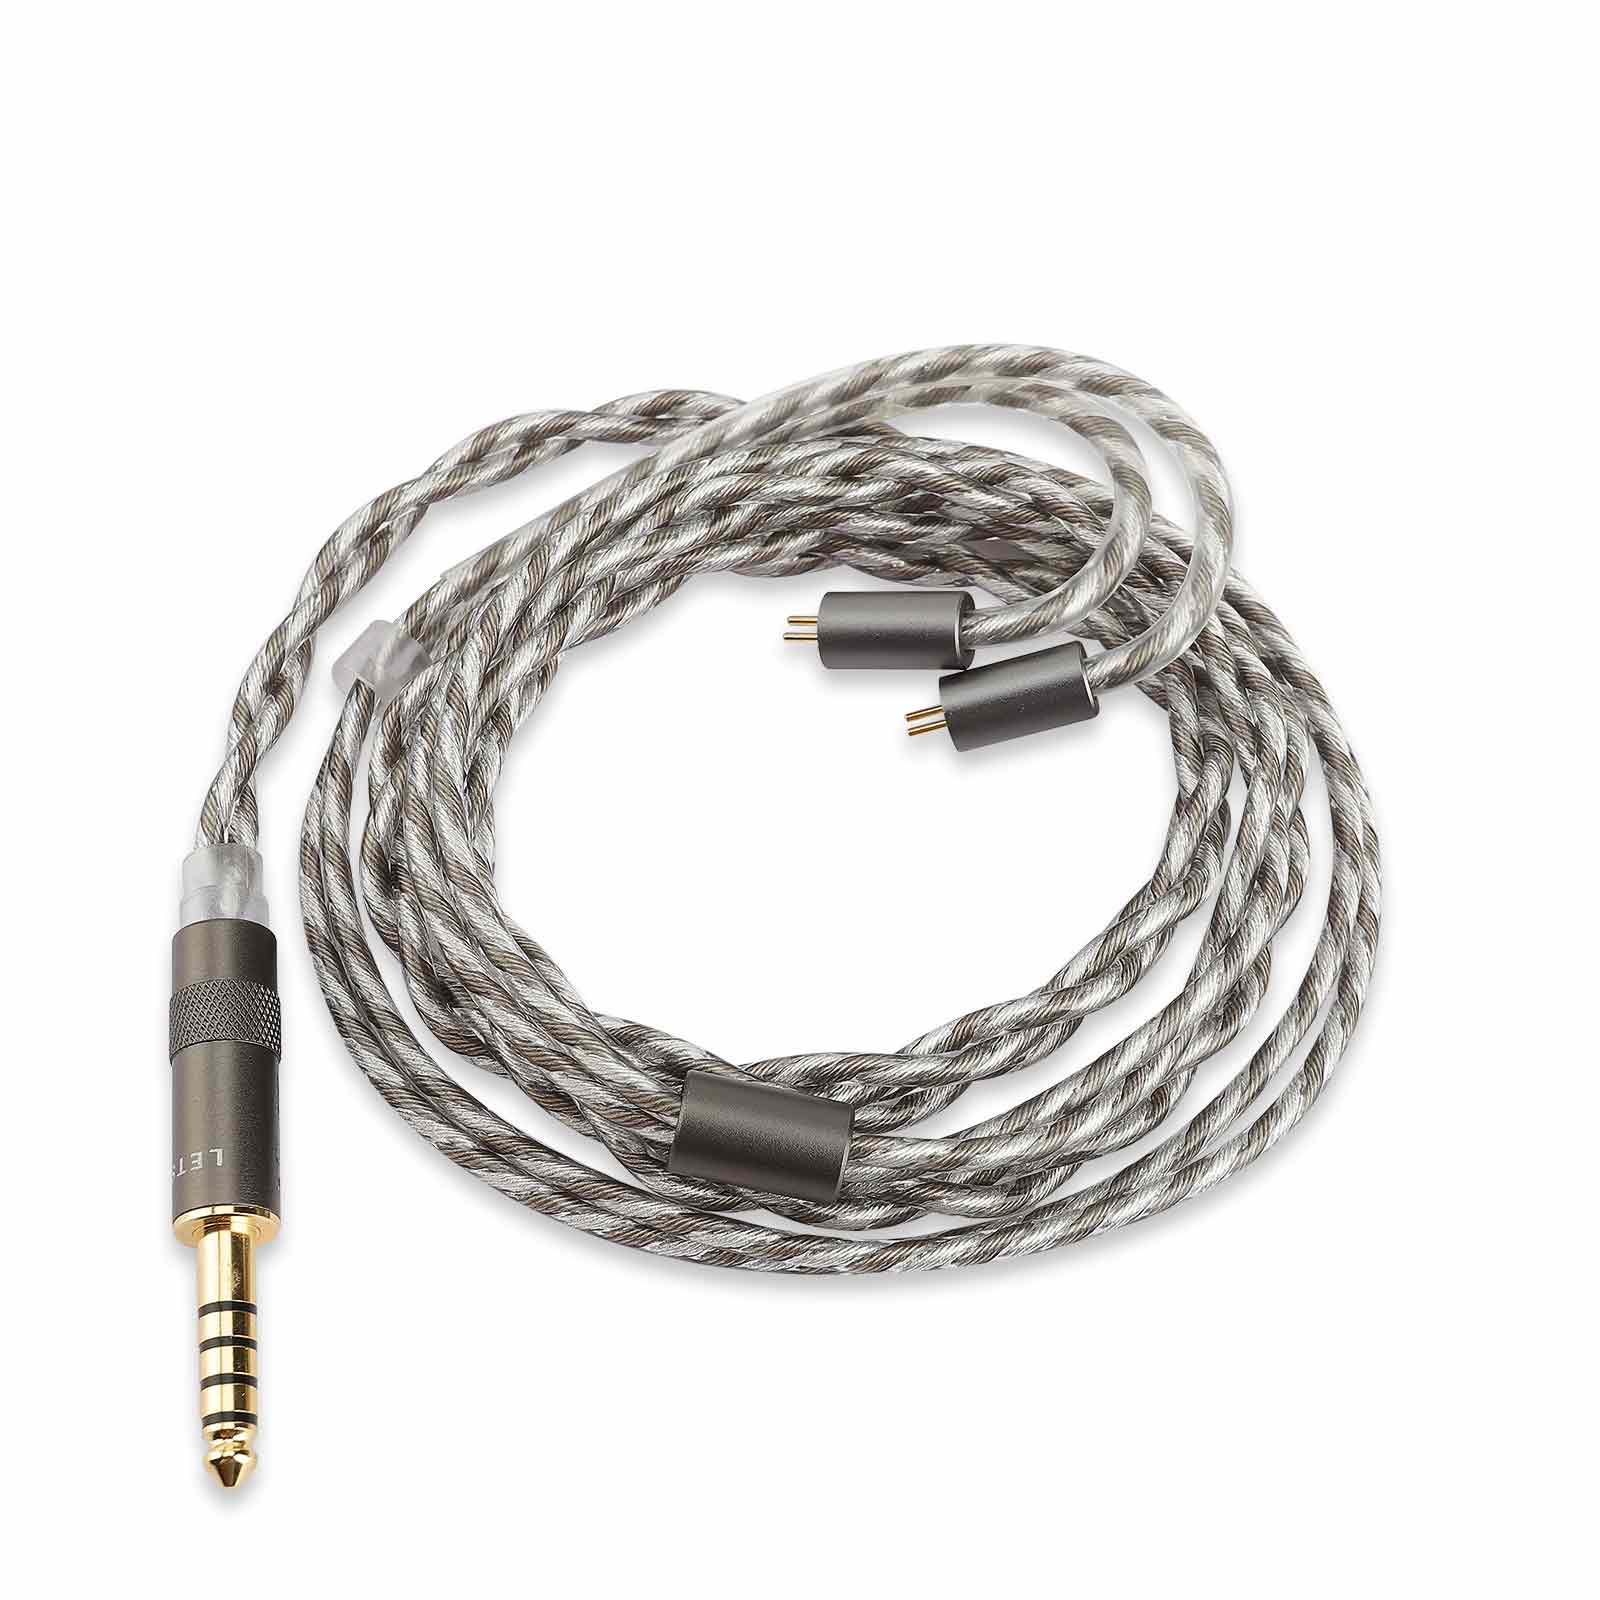 LETSHUOER M5-Standard S12 audio 3.5mm cable or 4.4mm balanced headphone cables with 2 pin connector 392 strands silver-plated monocrystalline copper cable